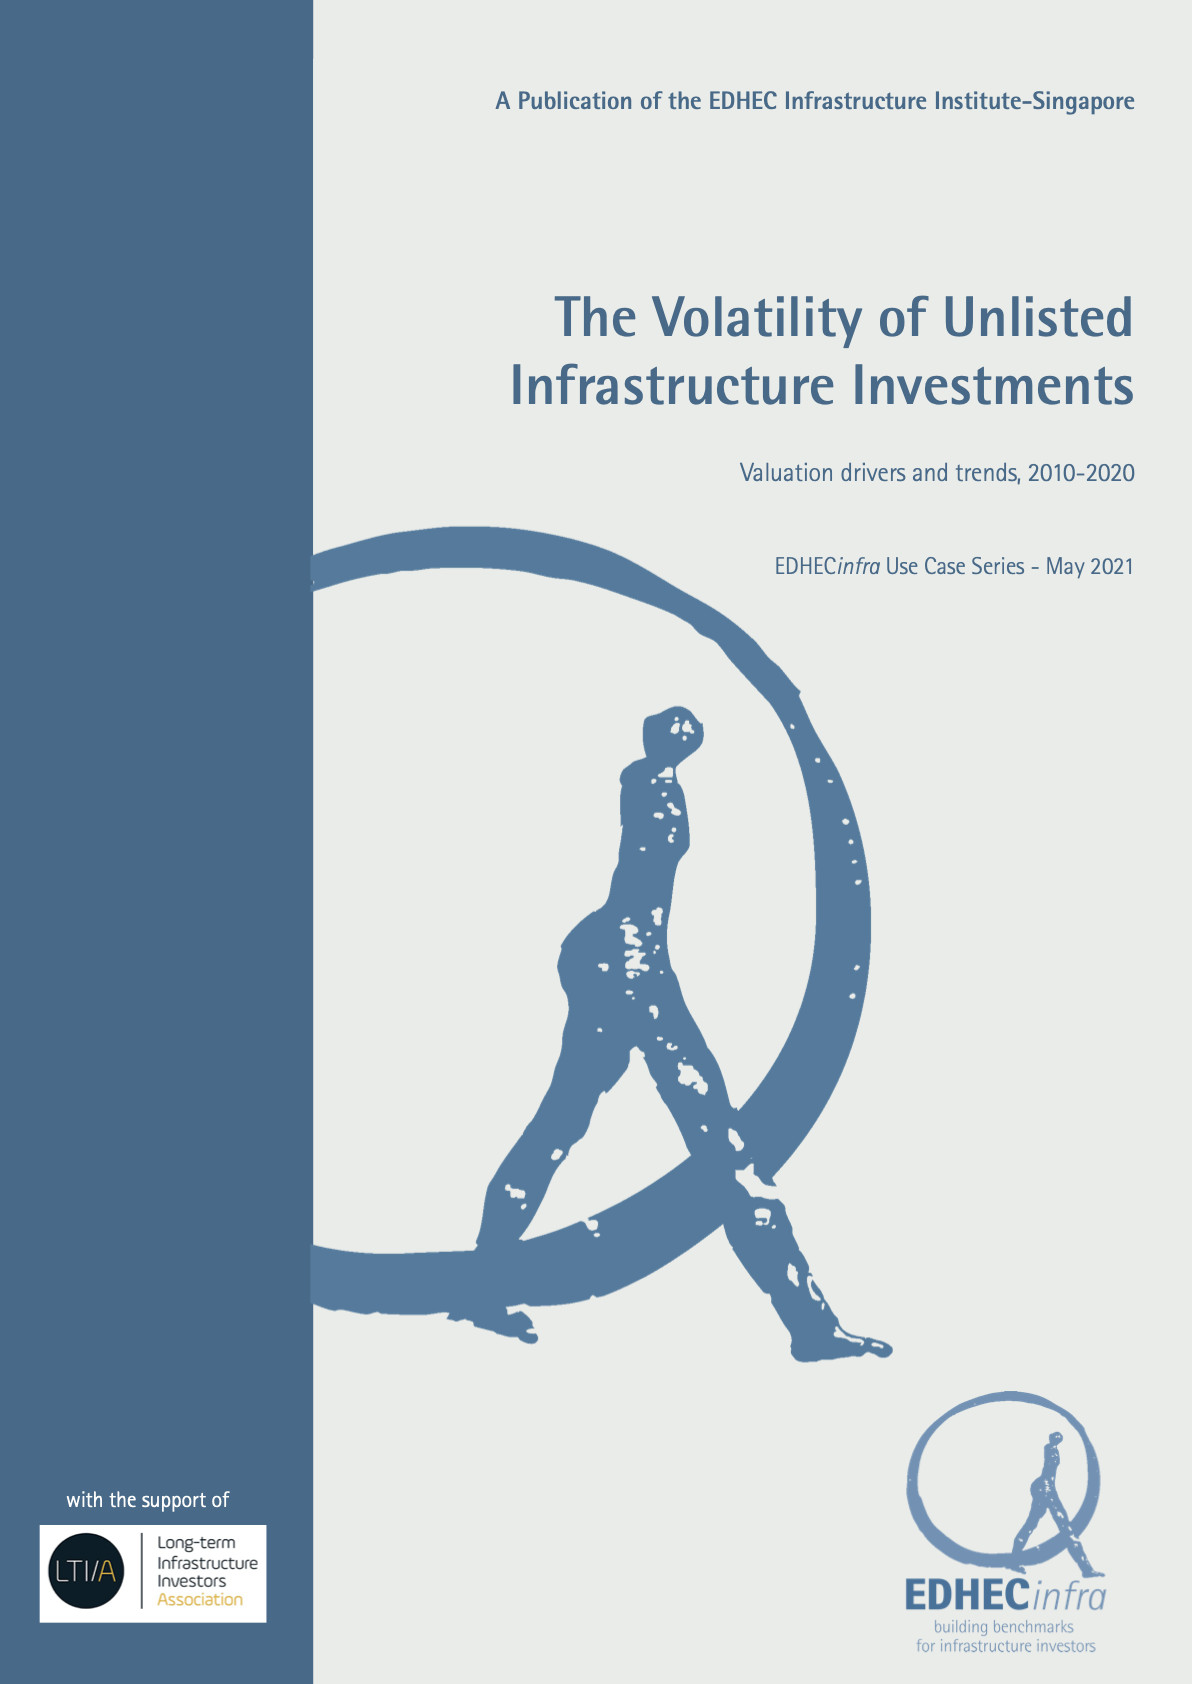 The Volatility of Unlisted Infrastructure Investments